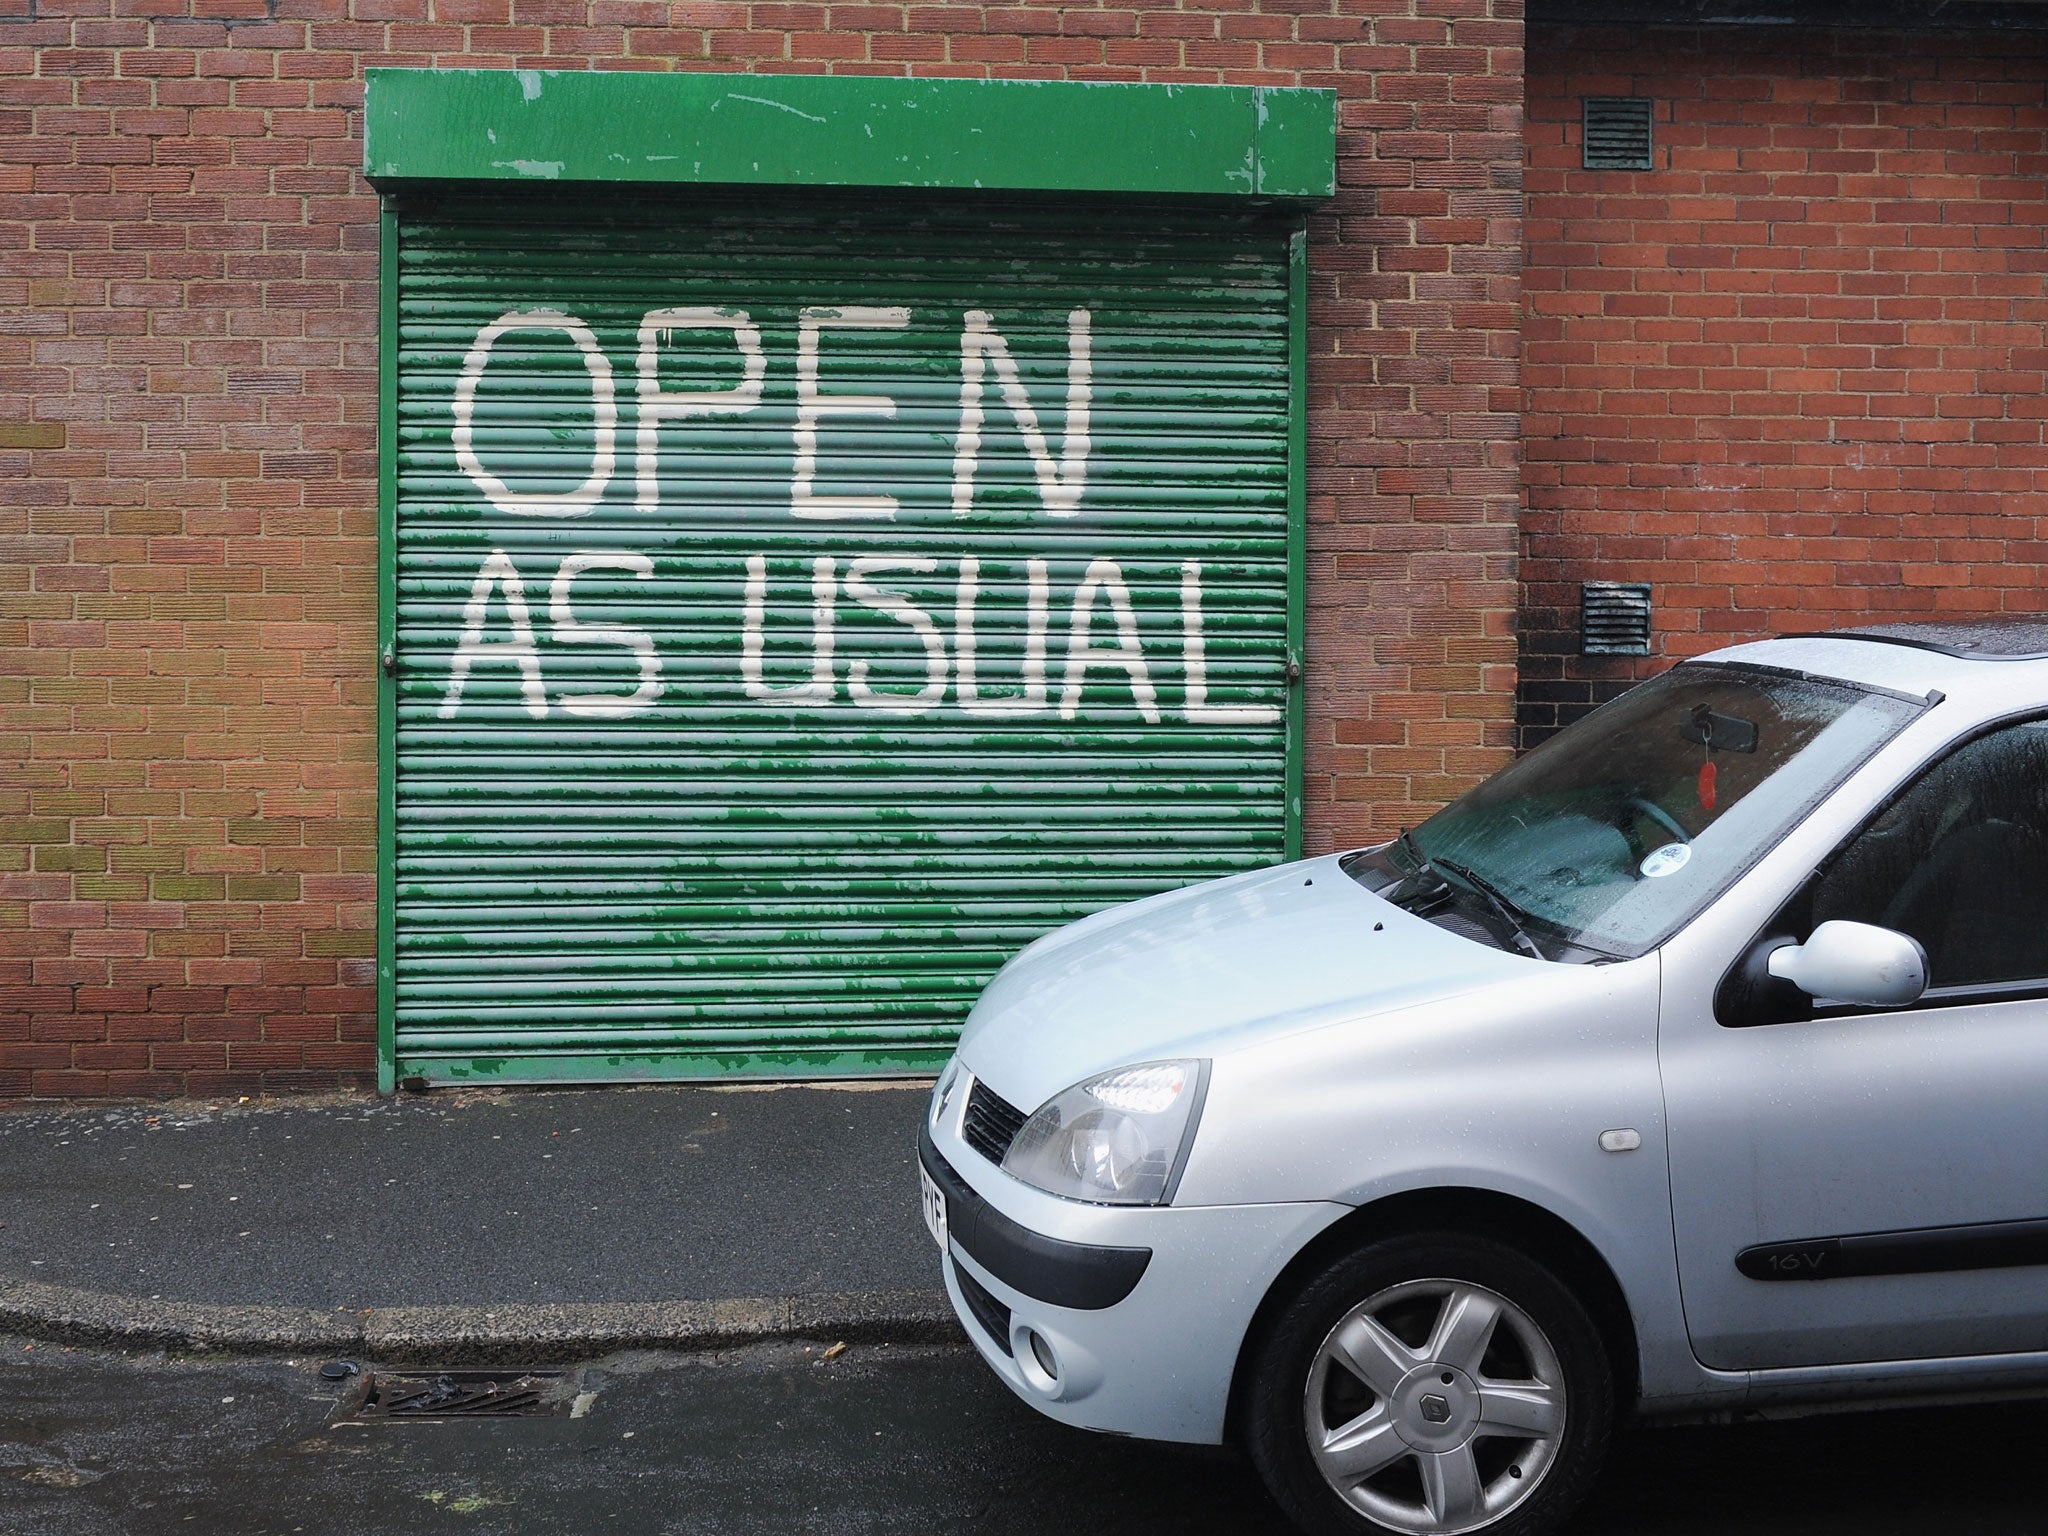 A car is parked near a garage door displaying the words 'open as usual' on a street on April 17, 2013 in Easington, England. Former miners and their families held a commemoration party for the closure of the pit at Easington Colliery; coinciding with the ceremonial funeral for Baroness Thatcher, who took on the mining union during the miners' strike which ultimately led to the closure of the mines and the loss of jobs.